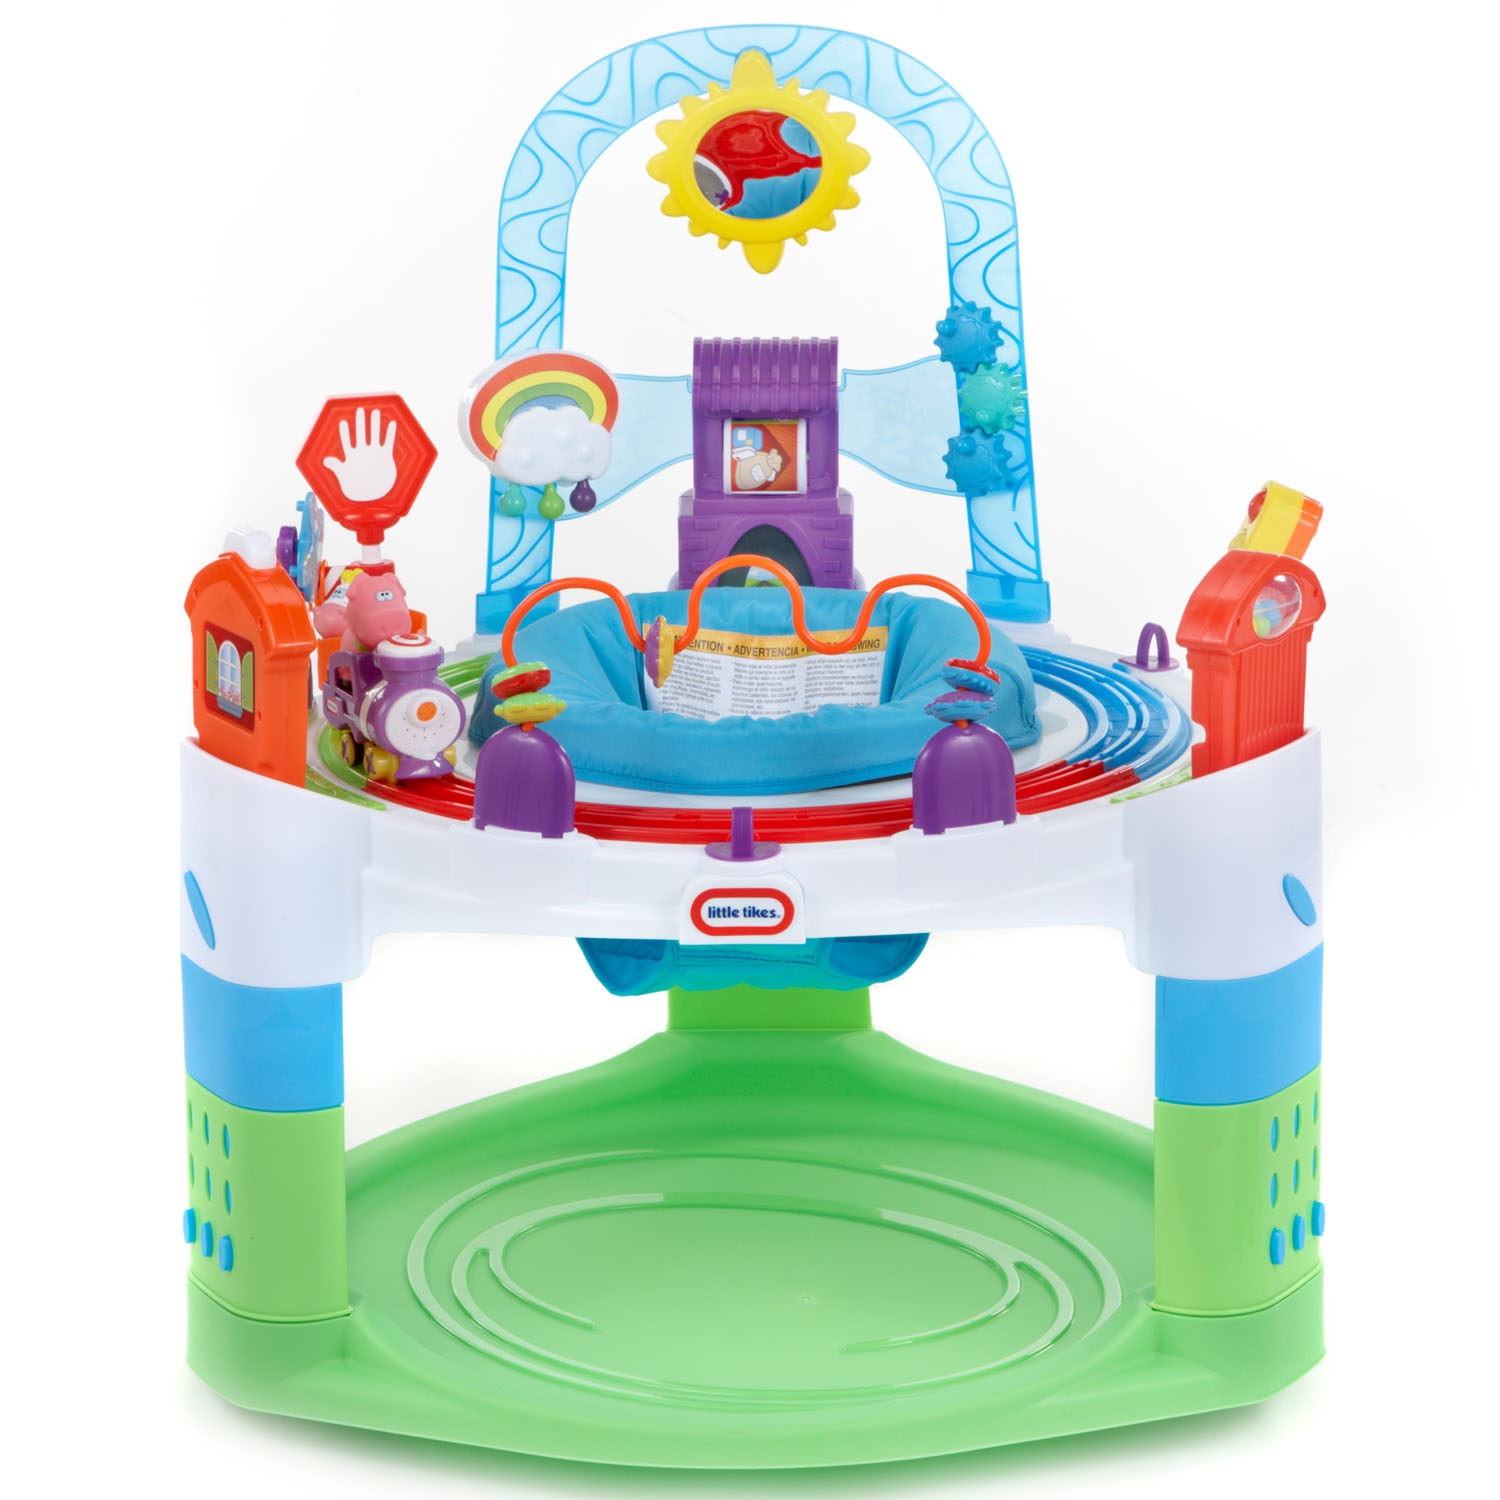 Little Tikes Discover & Learn Activity Center - image 1 of 4